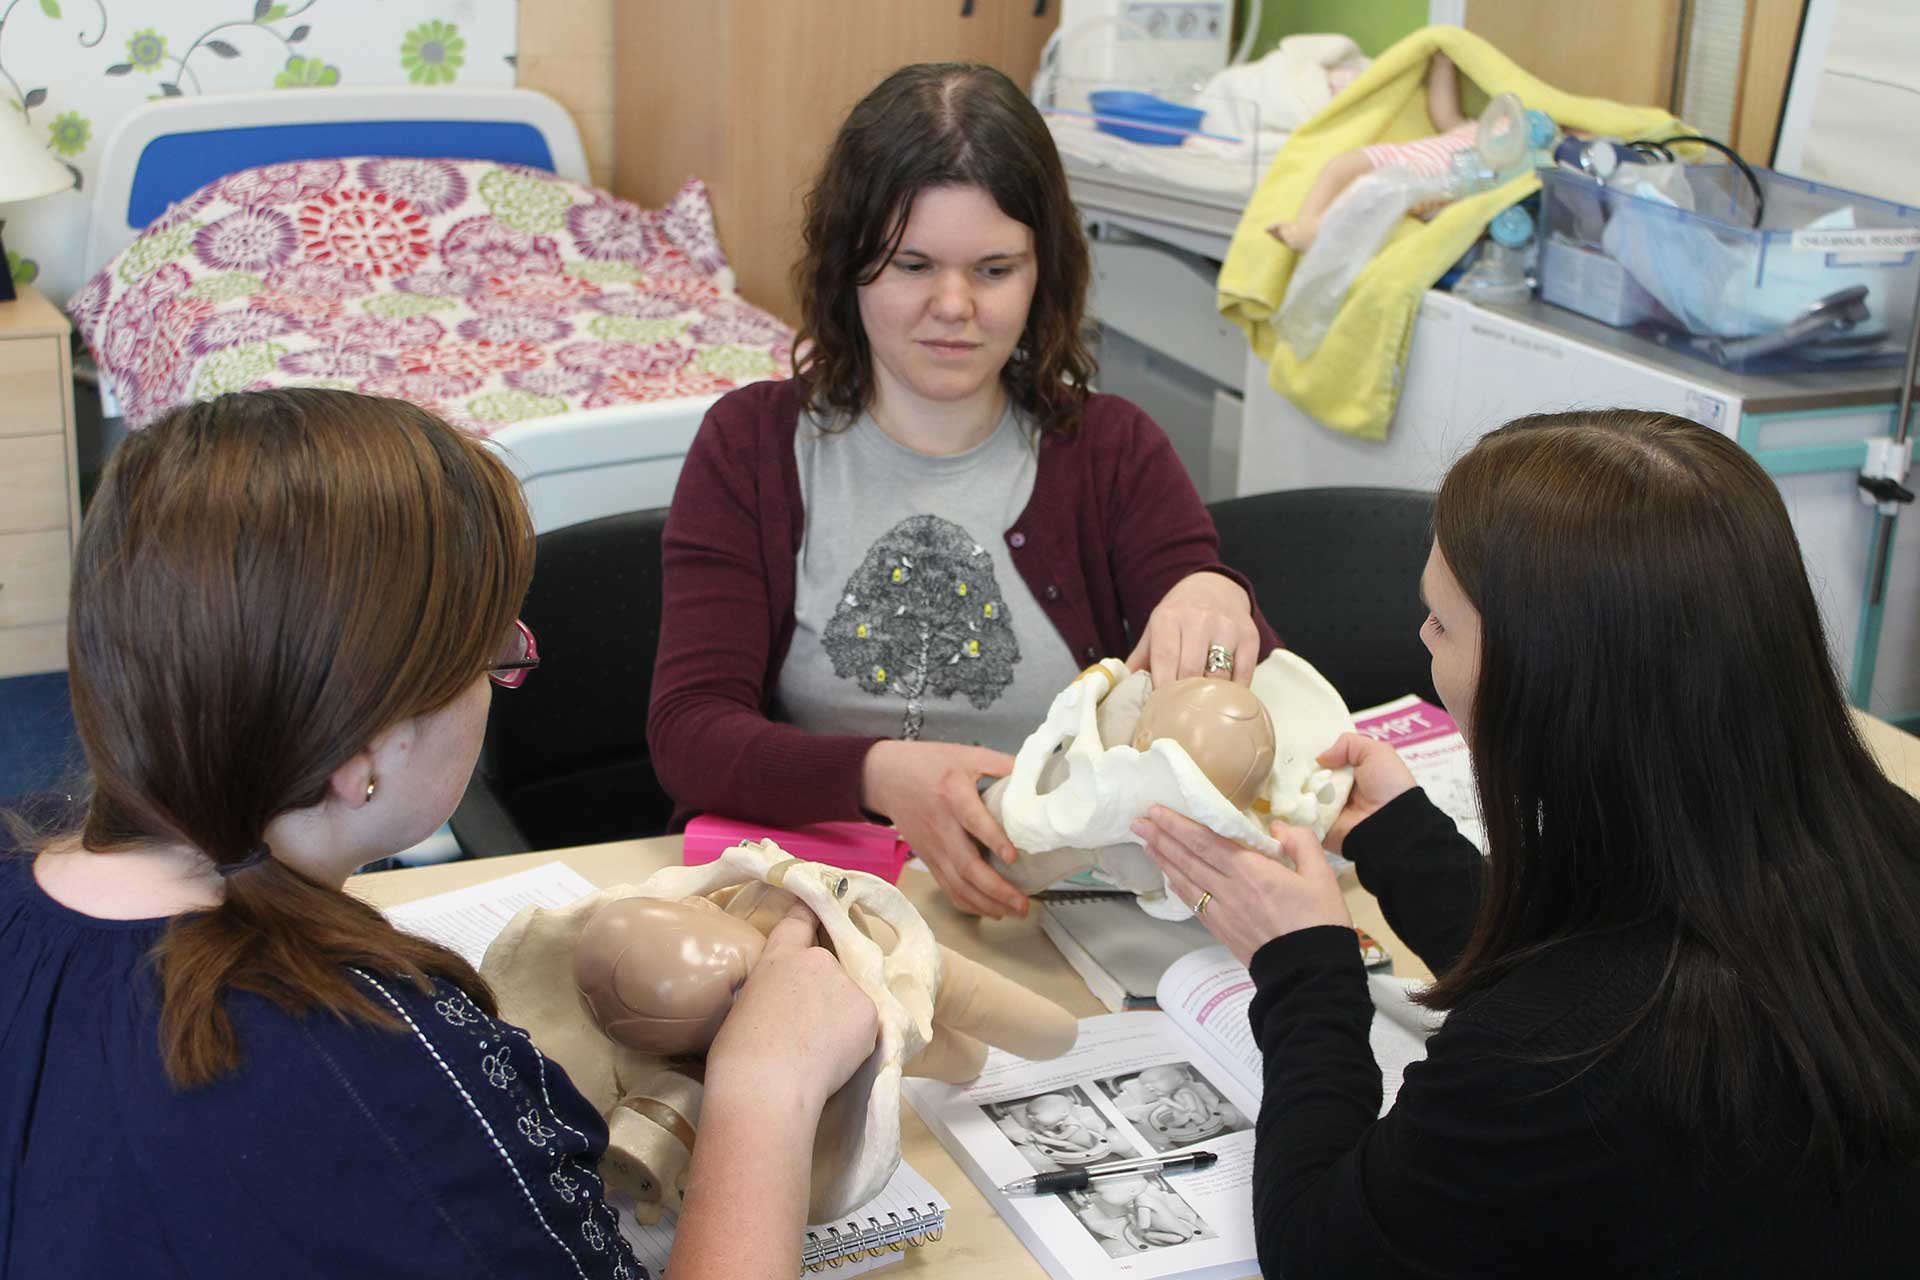 Students in clinical session with baby in pelvis